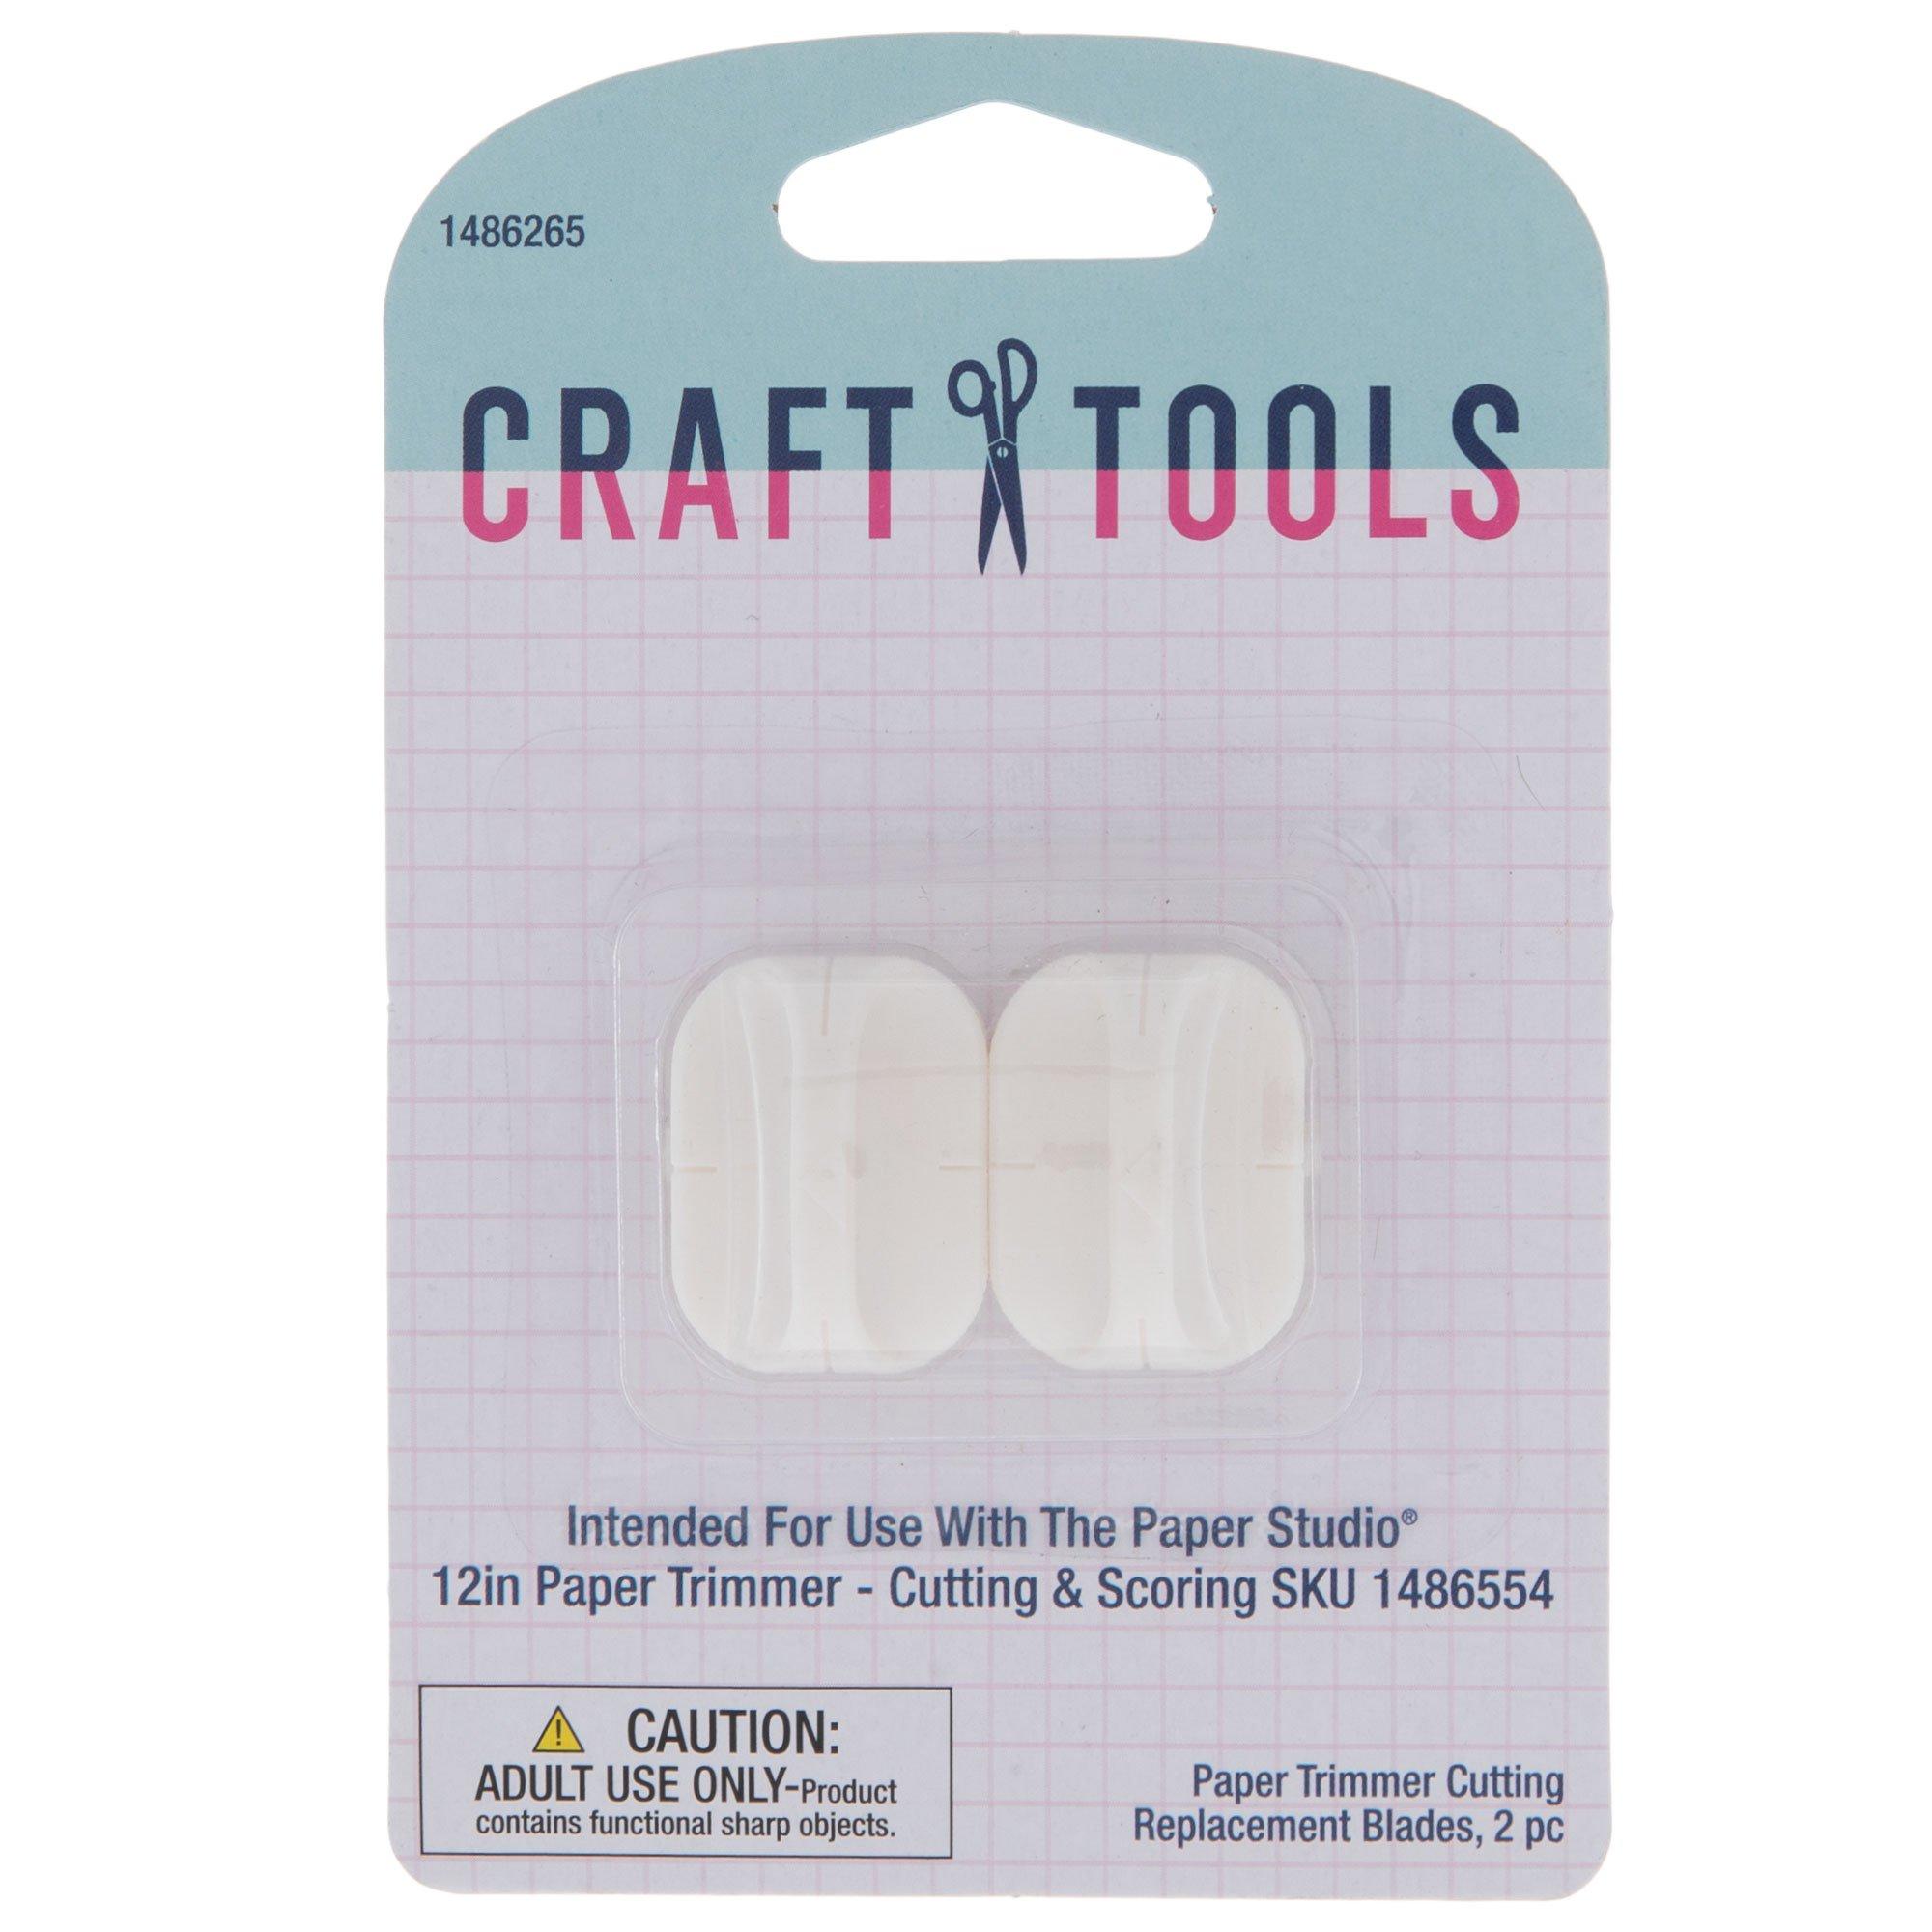 Four oh Five Basics Crafting Tools. Trimmer, Scoring Blade scissors & more